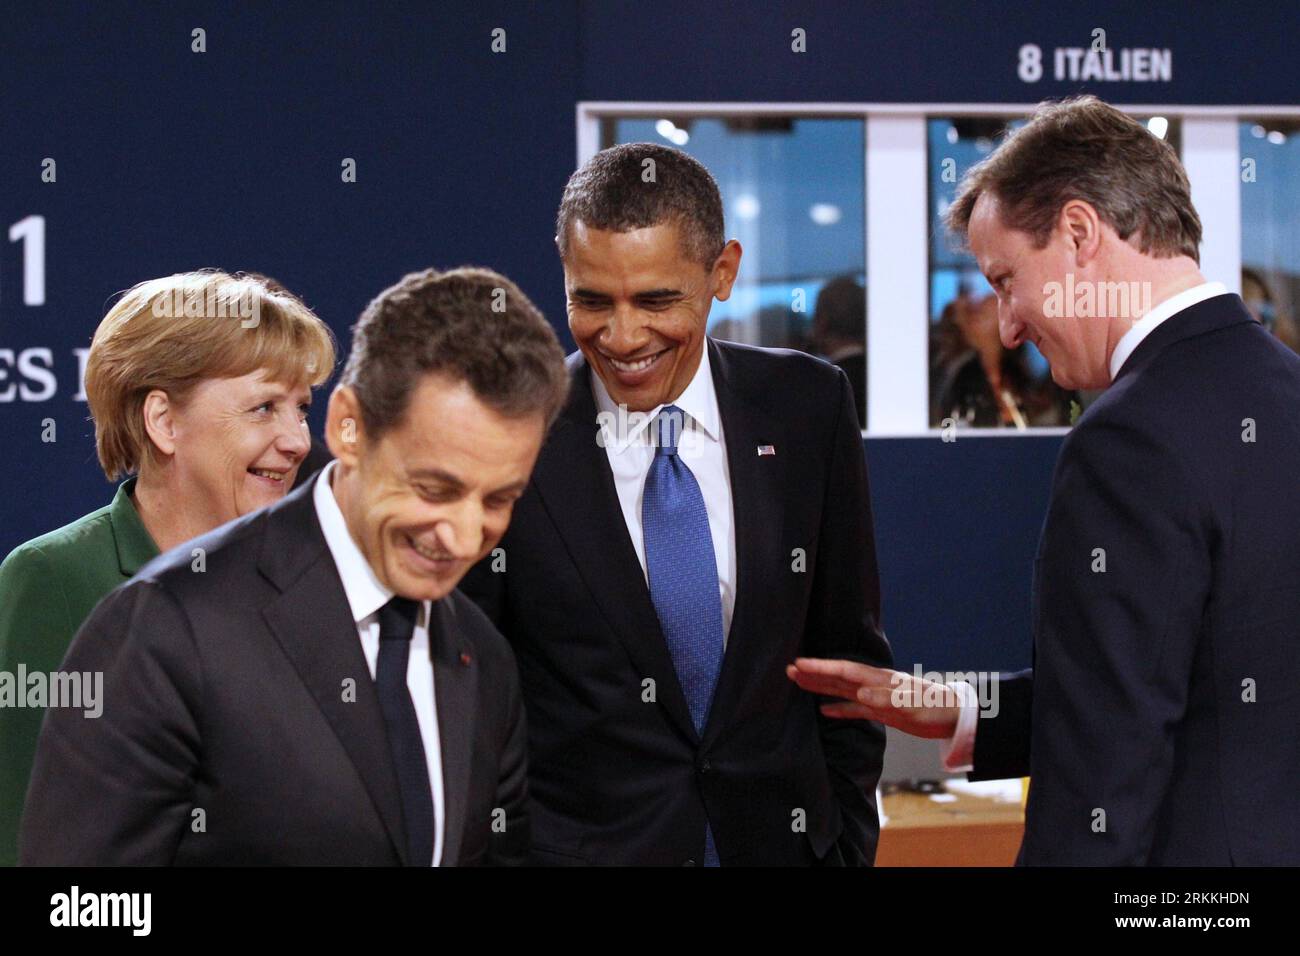 Bildnummer: 56244379  Datum: 03.11.2011  Copyright: imago/Xinhua (111103) -- CANNES, Nov. 3, 2011 (Xinhua) -- French President Nicolas Sarkozy (2nd L), German Chancellor Angela Merkel (1st L), U.S. President Barack Obama (2nd R) and British Prime Minister David Cameron attend the welcoming ceremony of the Group of Twenty (G-20) summit in Cannes, France, Nov. 3, 2011. (Xinhua/Lan Hongguang) (zgp) FRANCE-CANNES-G20 SUMMIT-WELCOMING CEREMONY PUBLICATIONxNOTxINxCHN People Politik G20 G 20 Cannes Gipfel Weltwirtschaftsgipfel xjh x0x premiumd 2011 quer      56244379 Date 03 11 2011 Copyright Imago X Stock Photo